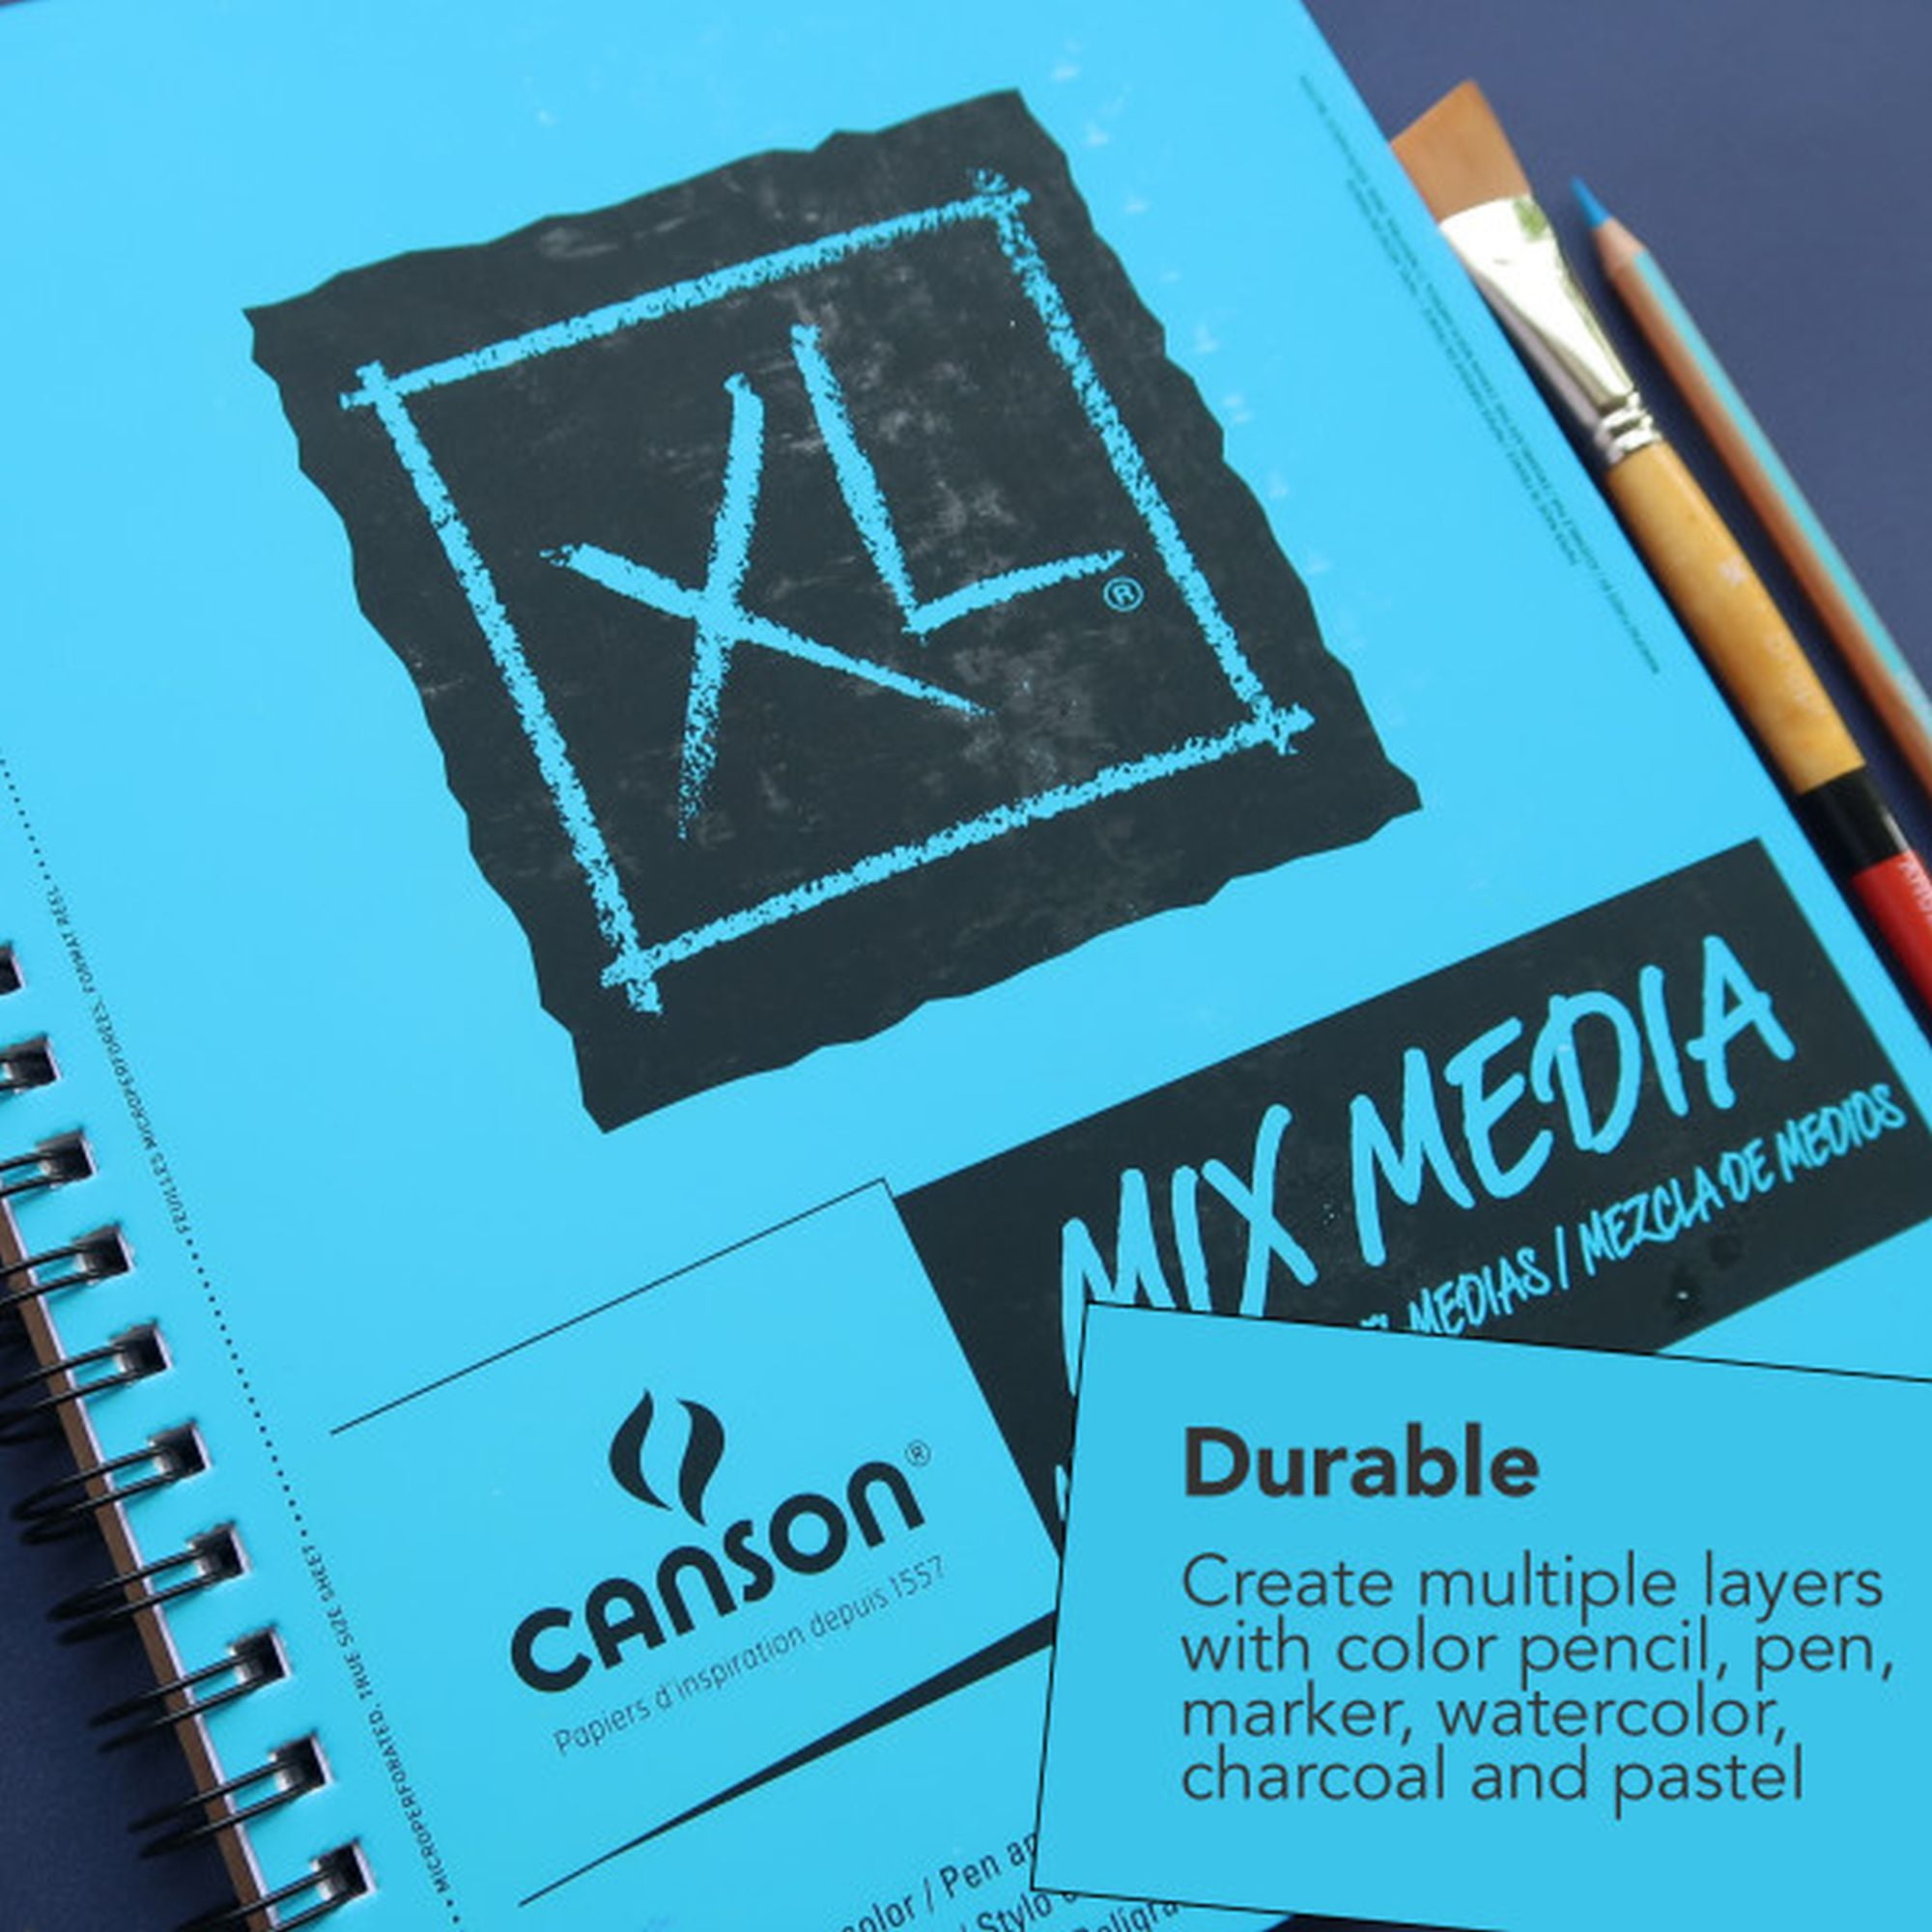 Canson XL Series Mixed Media Pad, Side Wire, 9x12 inches, 60 Sheets -  Heavyweight Art Paper for Watercolor, Gouache, Marker, Painting, Drawing,  Sketching